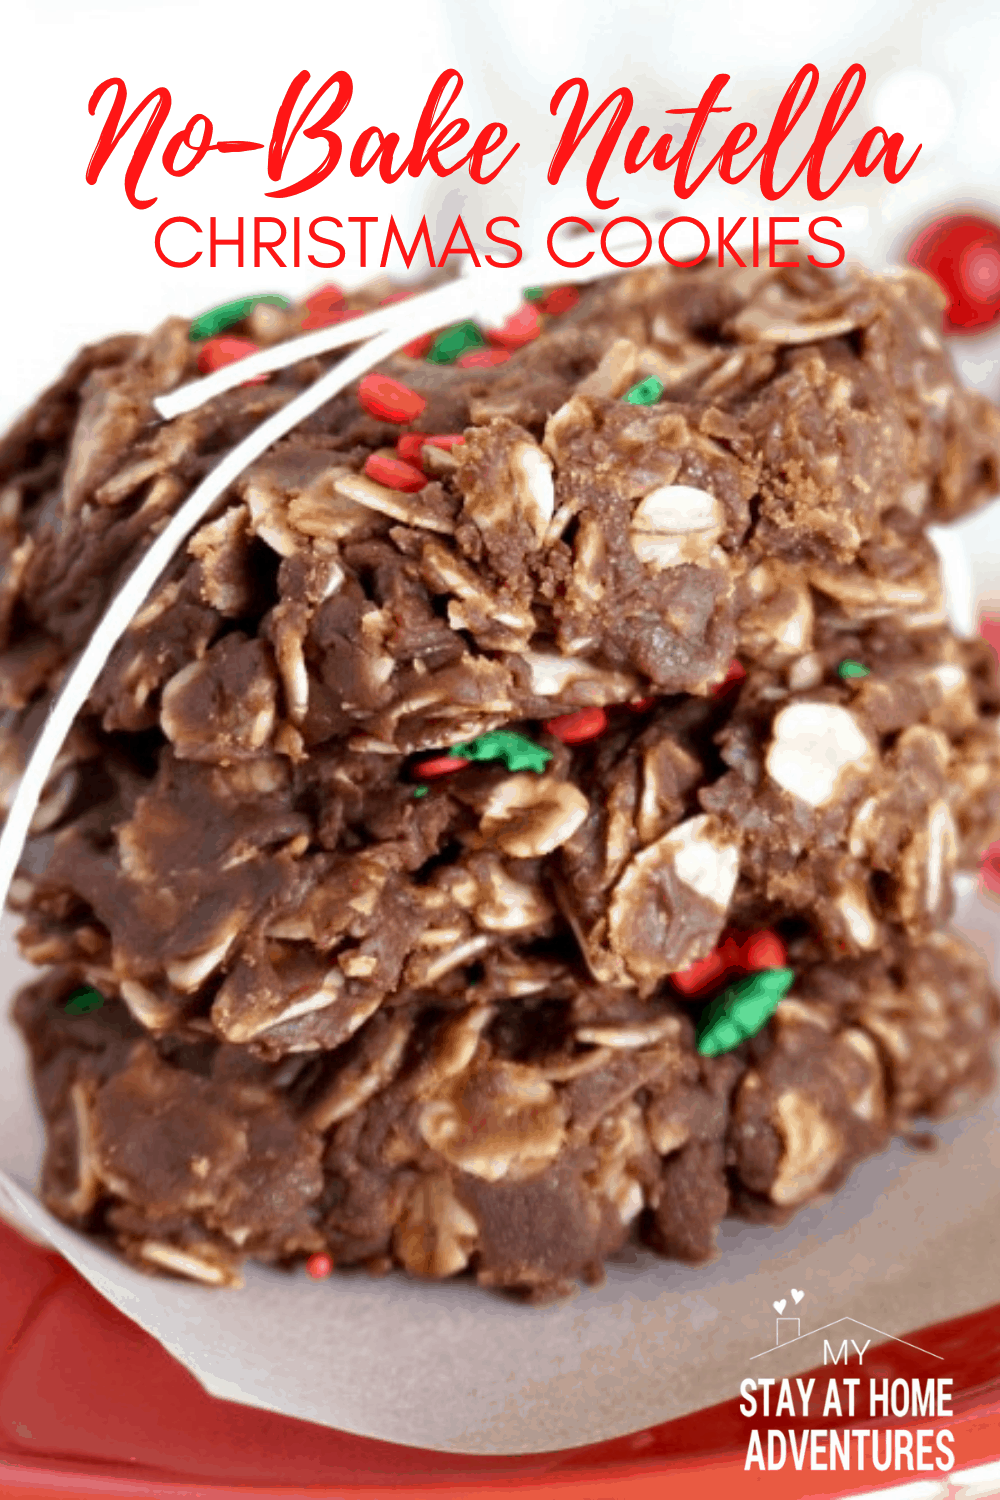 You haven't seen Christmas cookies until you try No Bake Nutella Christmas Cookies! Made with oats and no baking required, enjoy this cookie this holiday. #cookies #nobake #nutella via @mystayathome